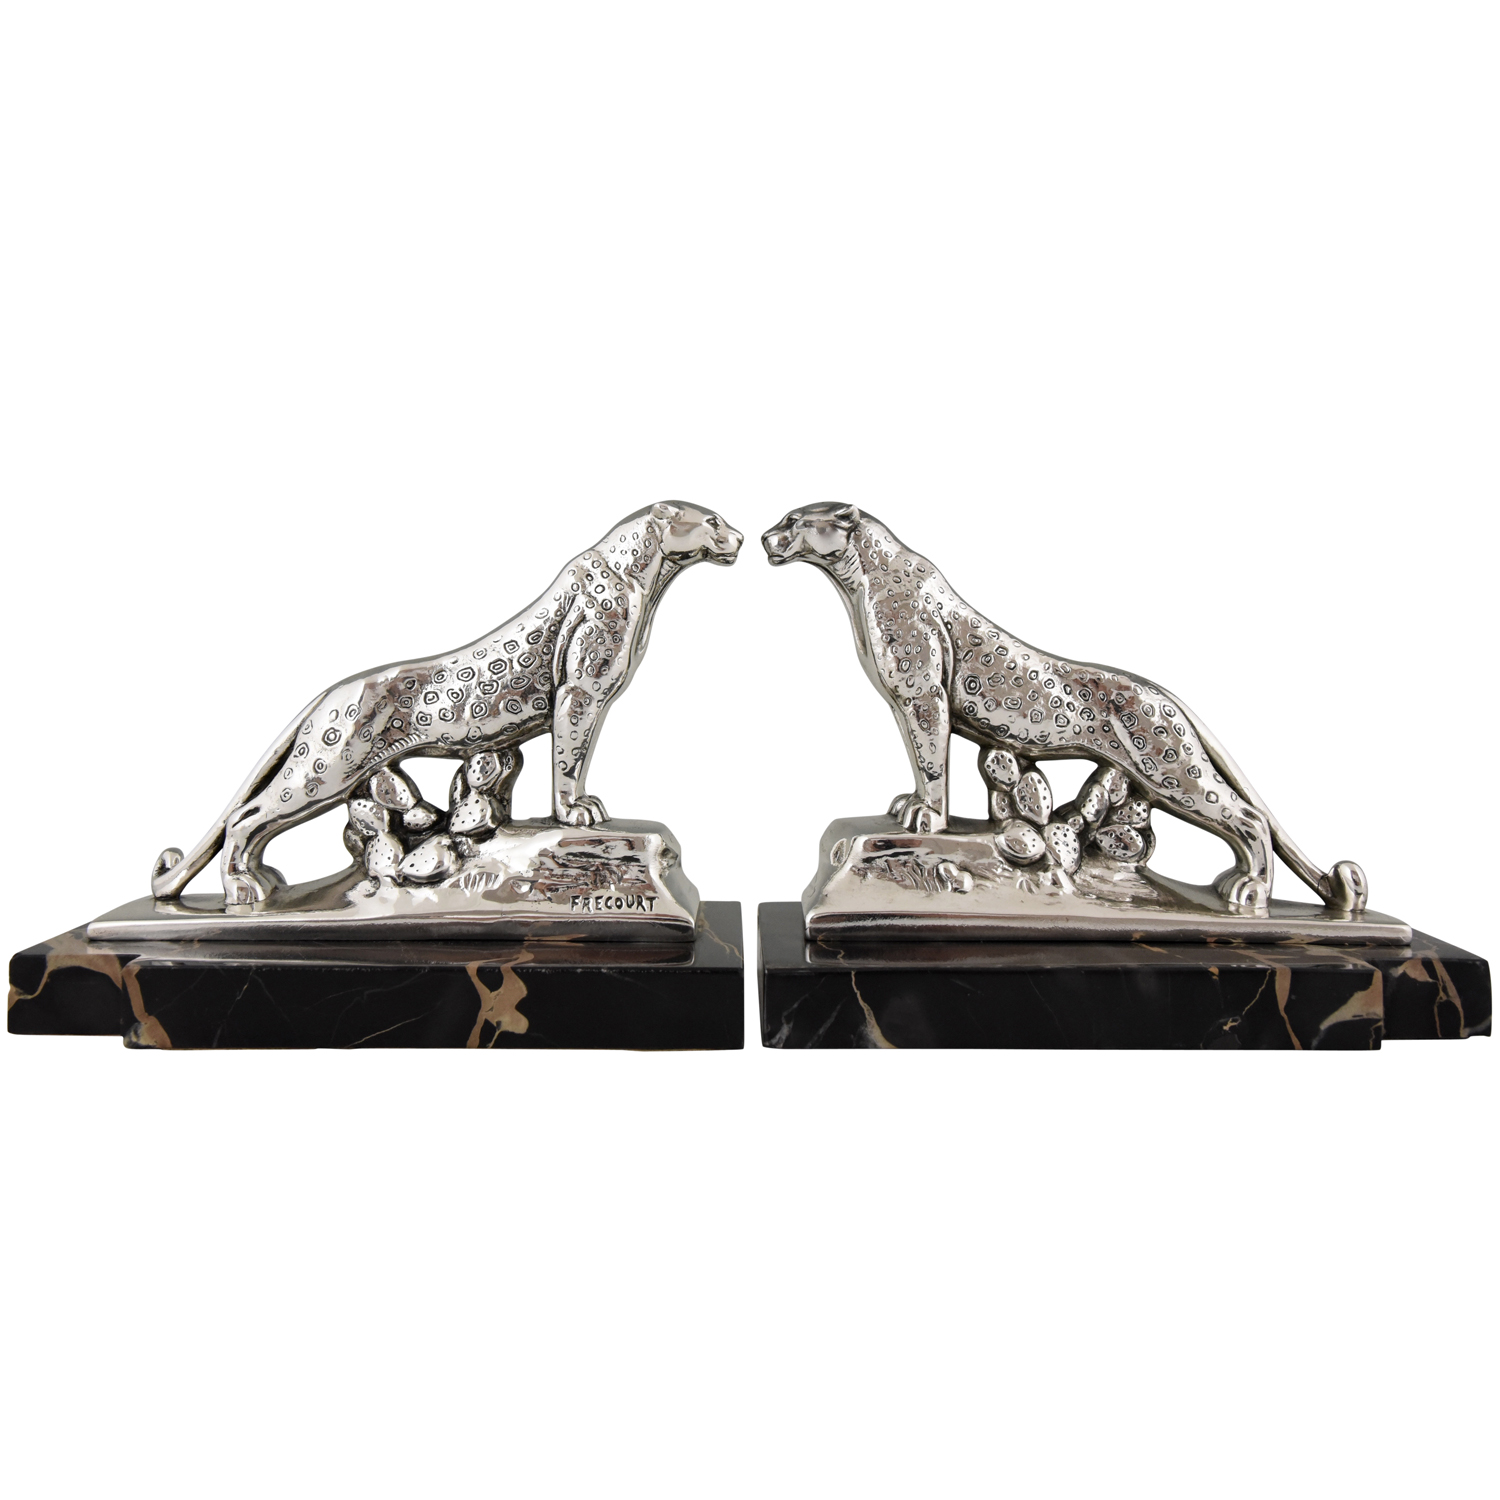 Art Deco panther bookends